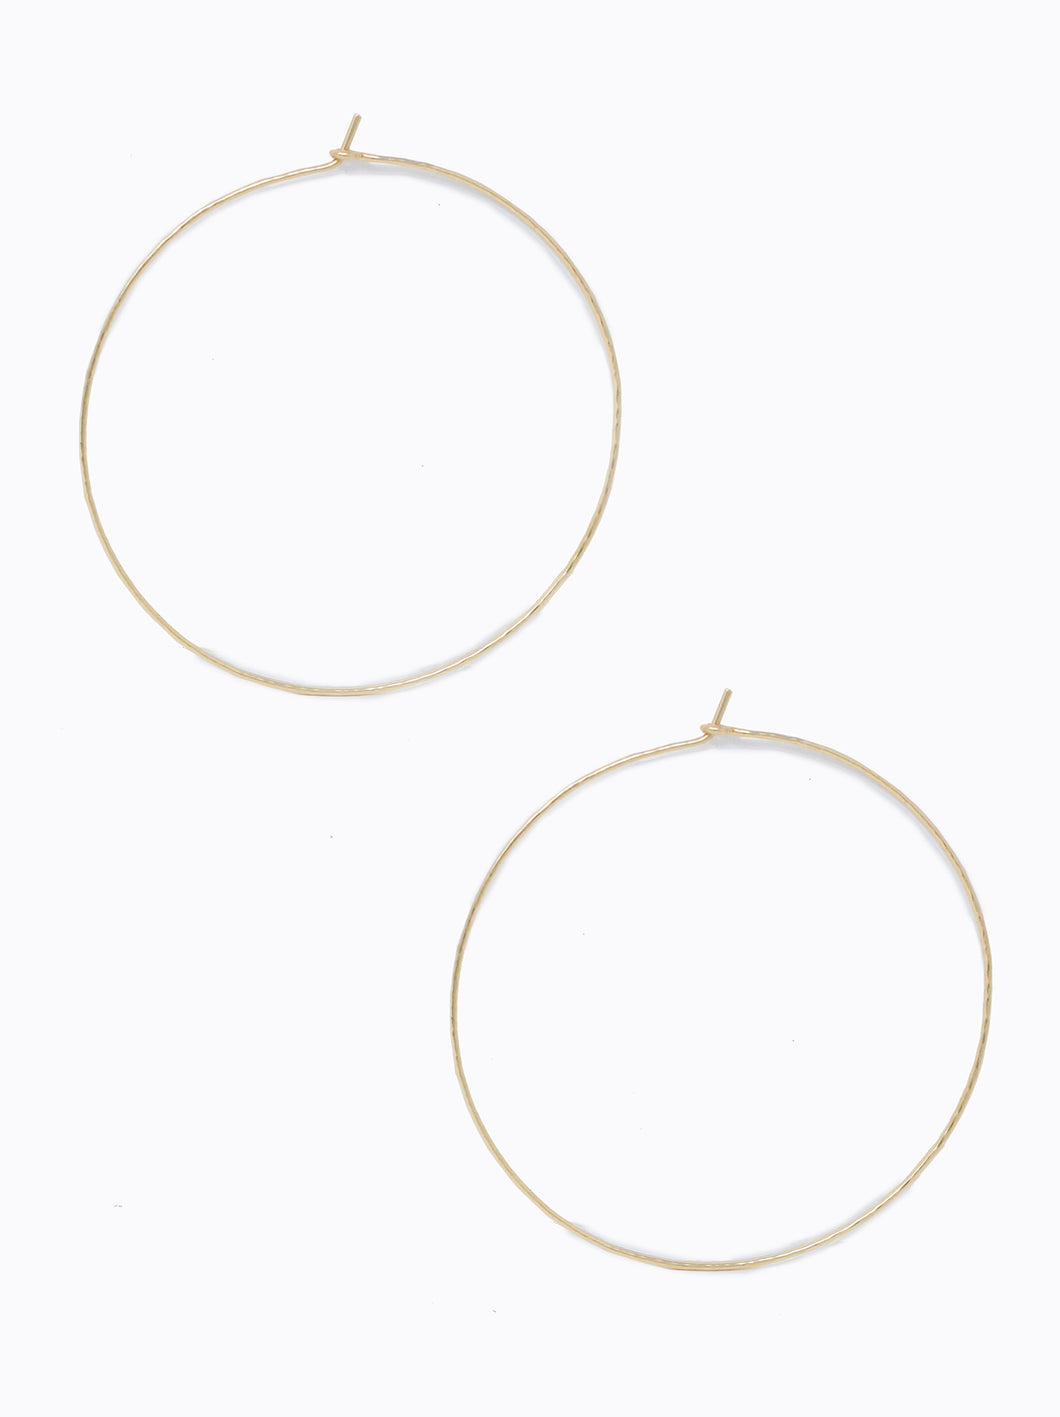 Luxe Hoops - 2.5” Gold-Filled